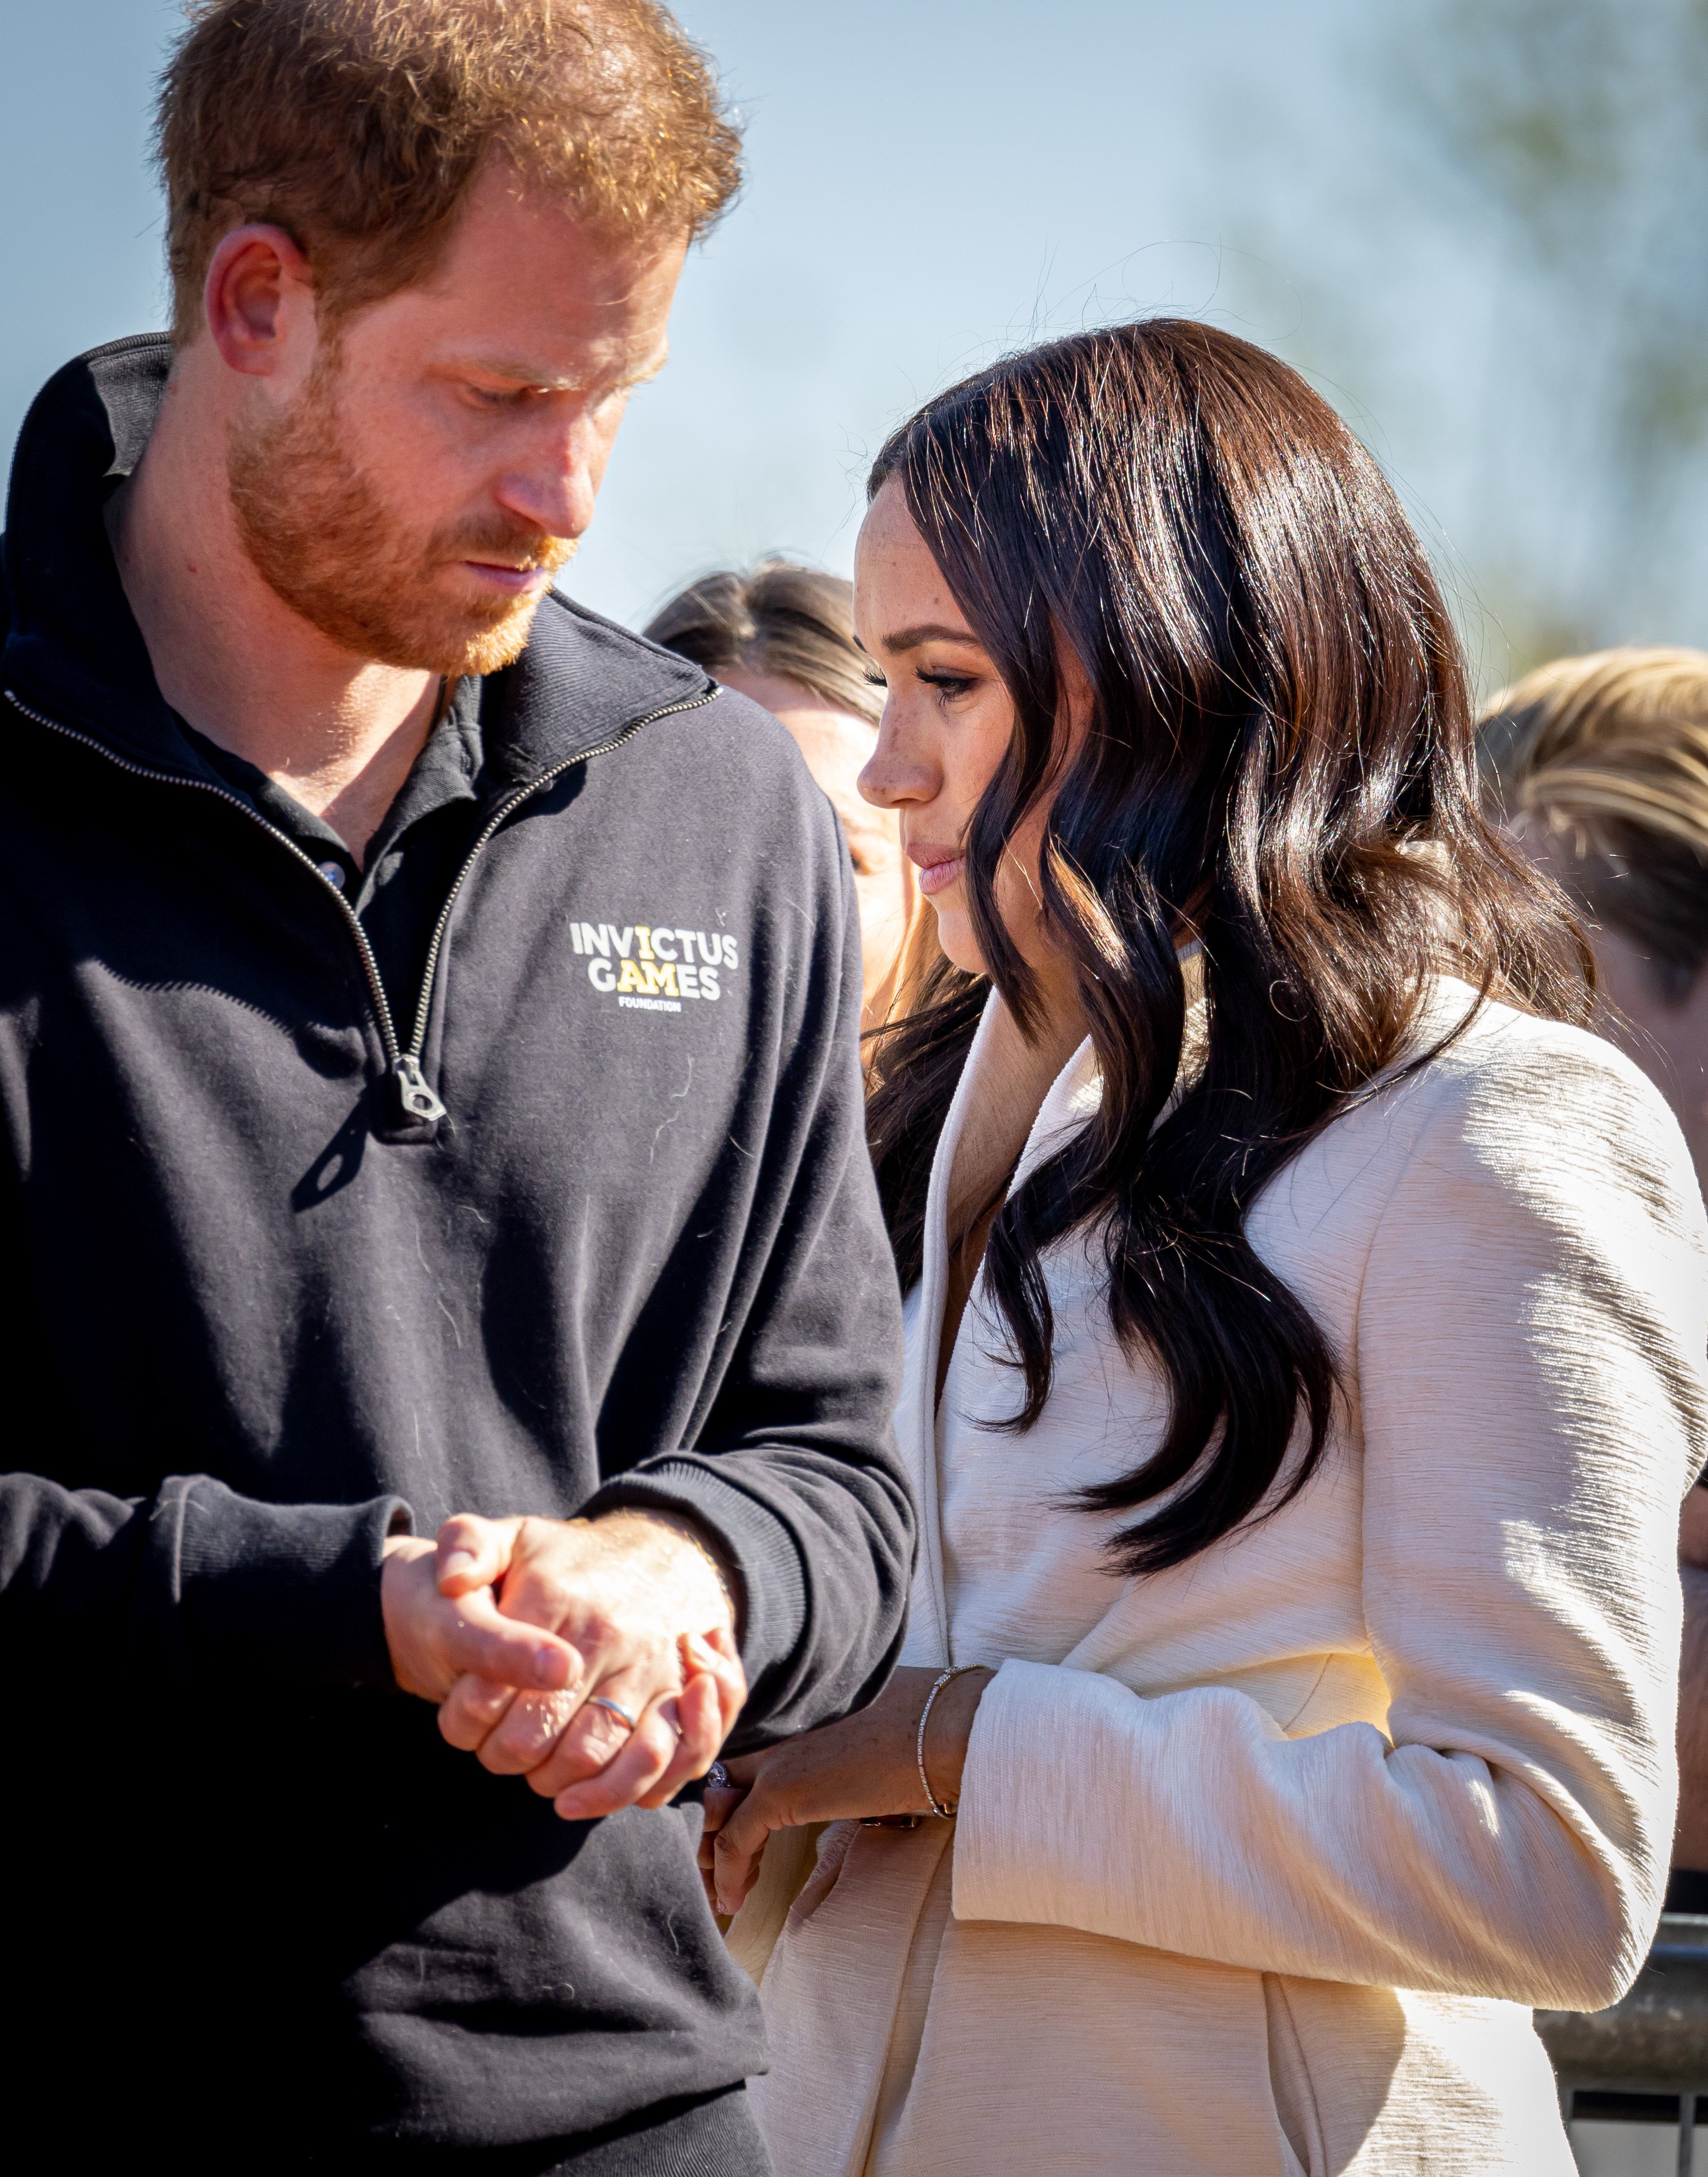 Prince Harry and Meghan Markle during day two of the Invictus Games 2020 at Zuiderpark on April 17, 2022 in The Hague, Netherlands. / Source: Getty Images